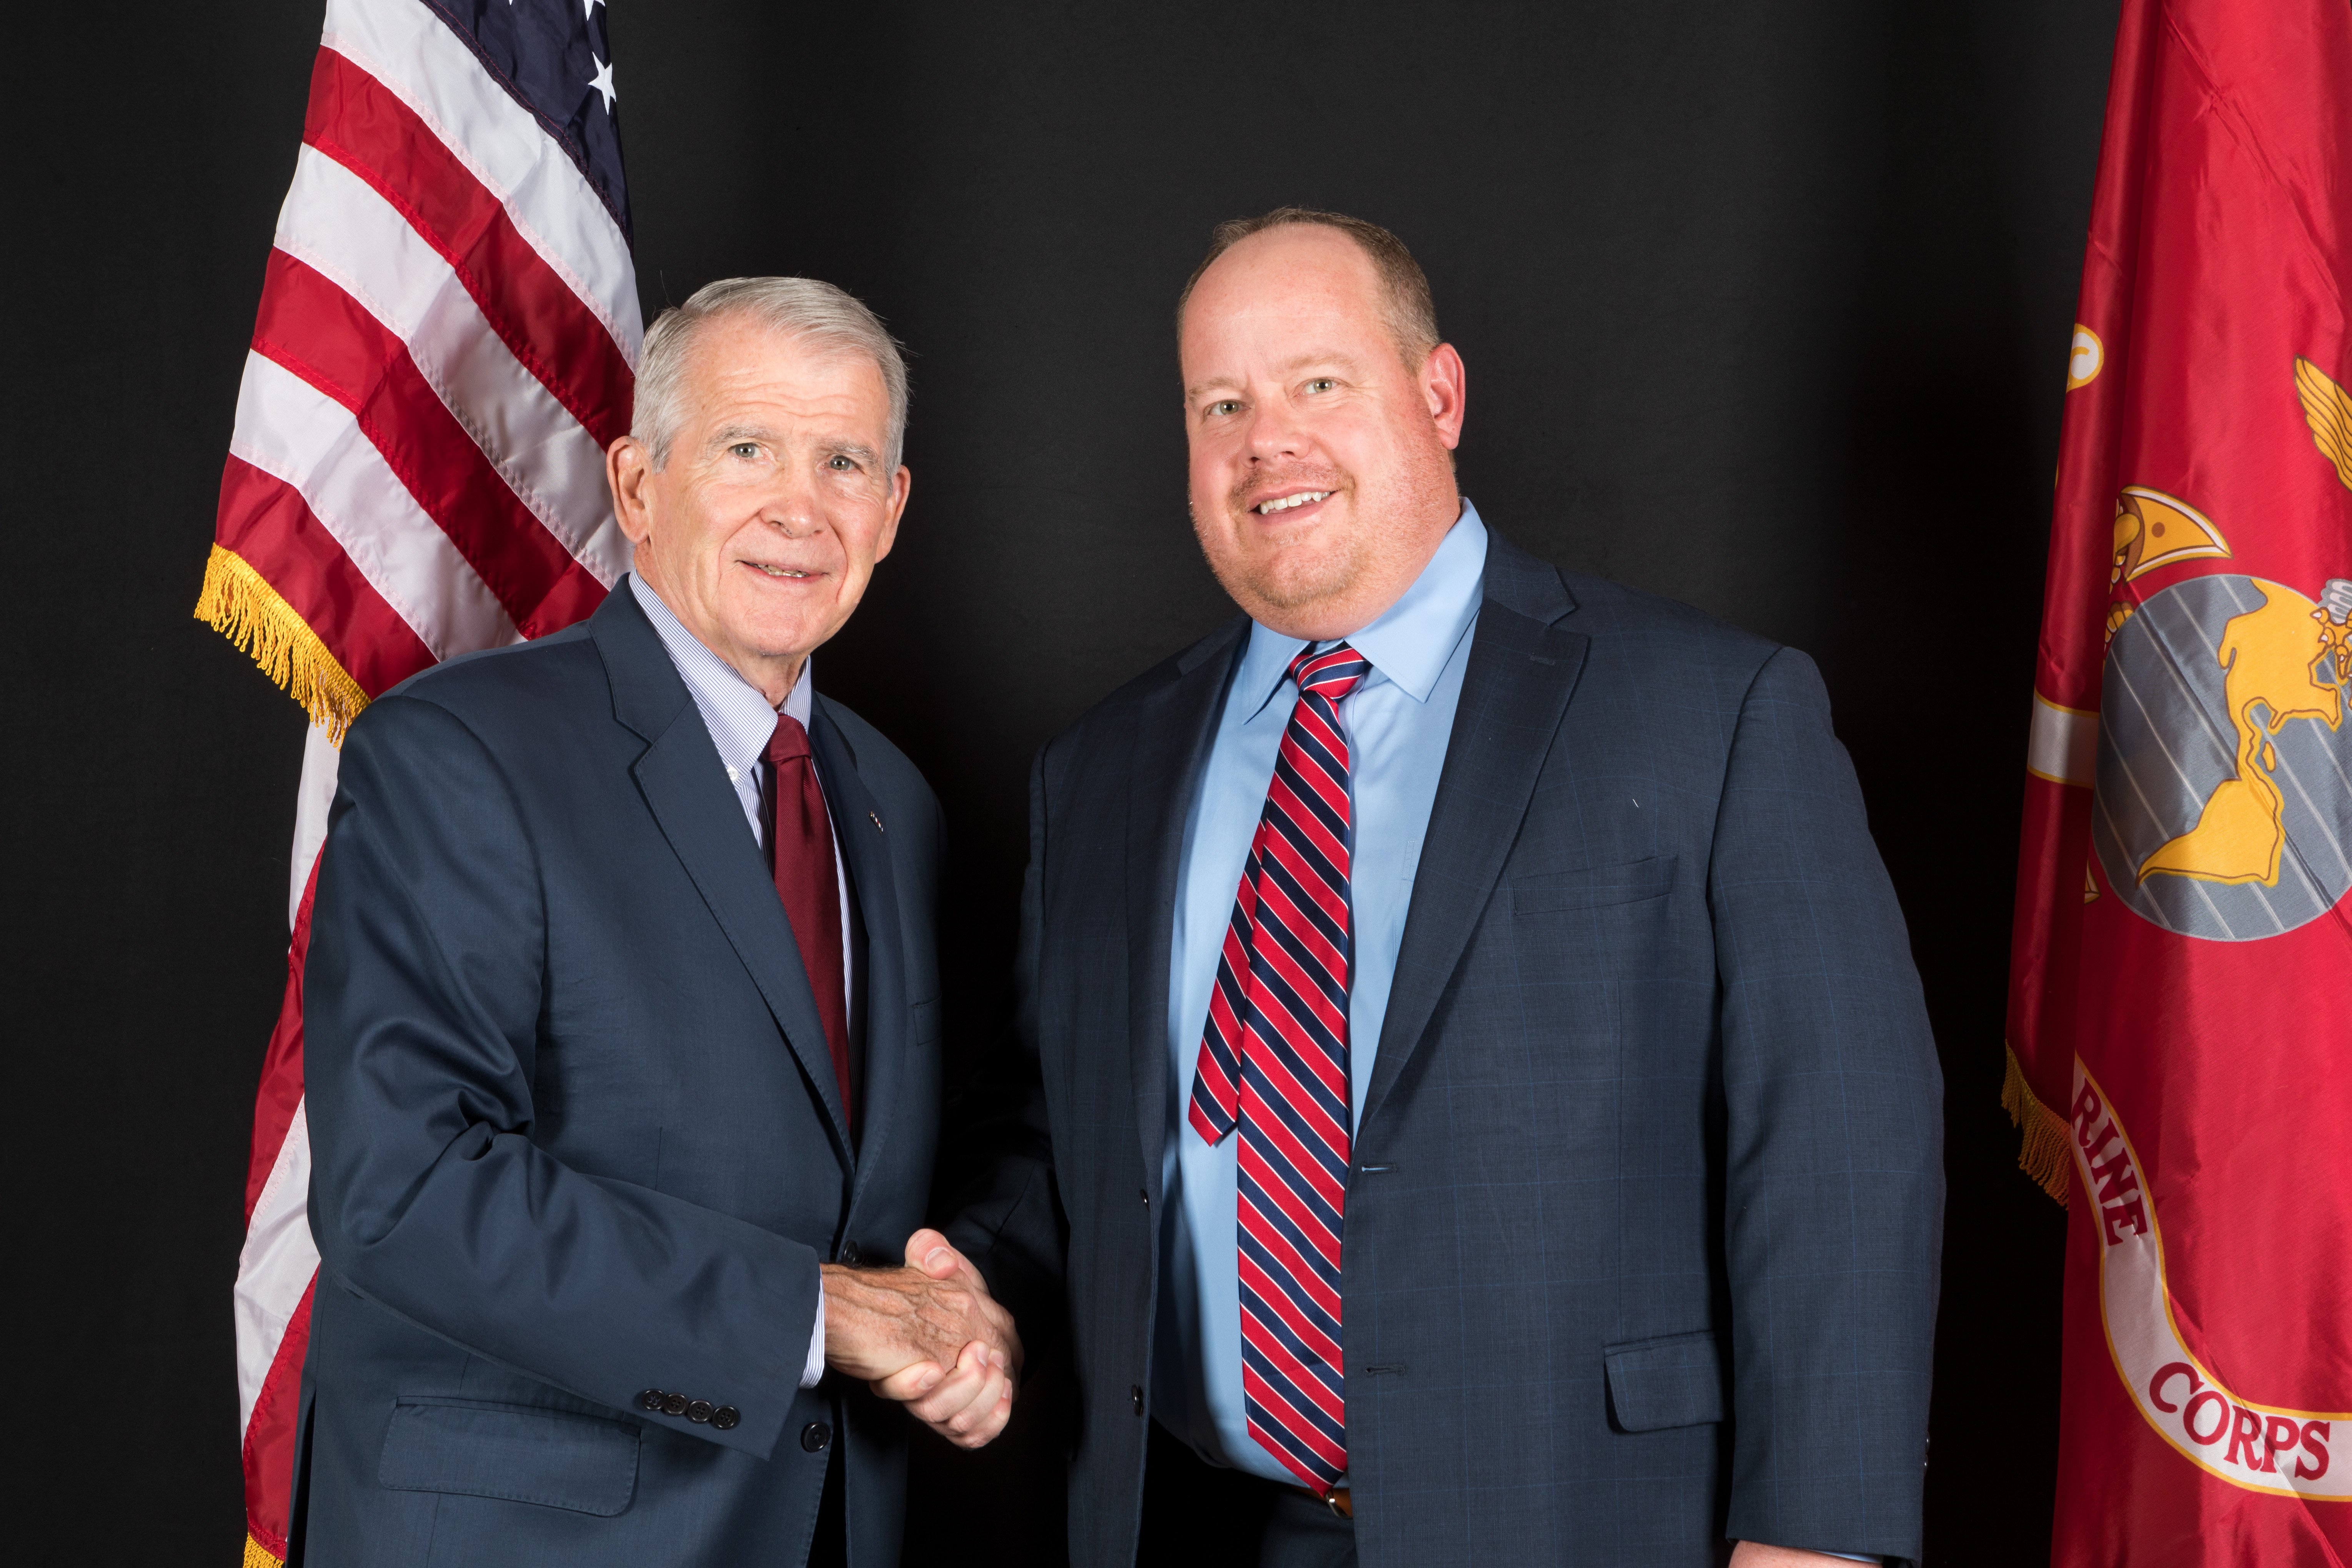 Lt. Col. Oliver North and Anthony Cox